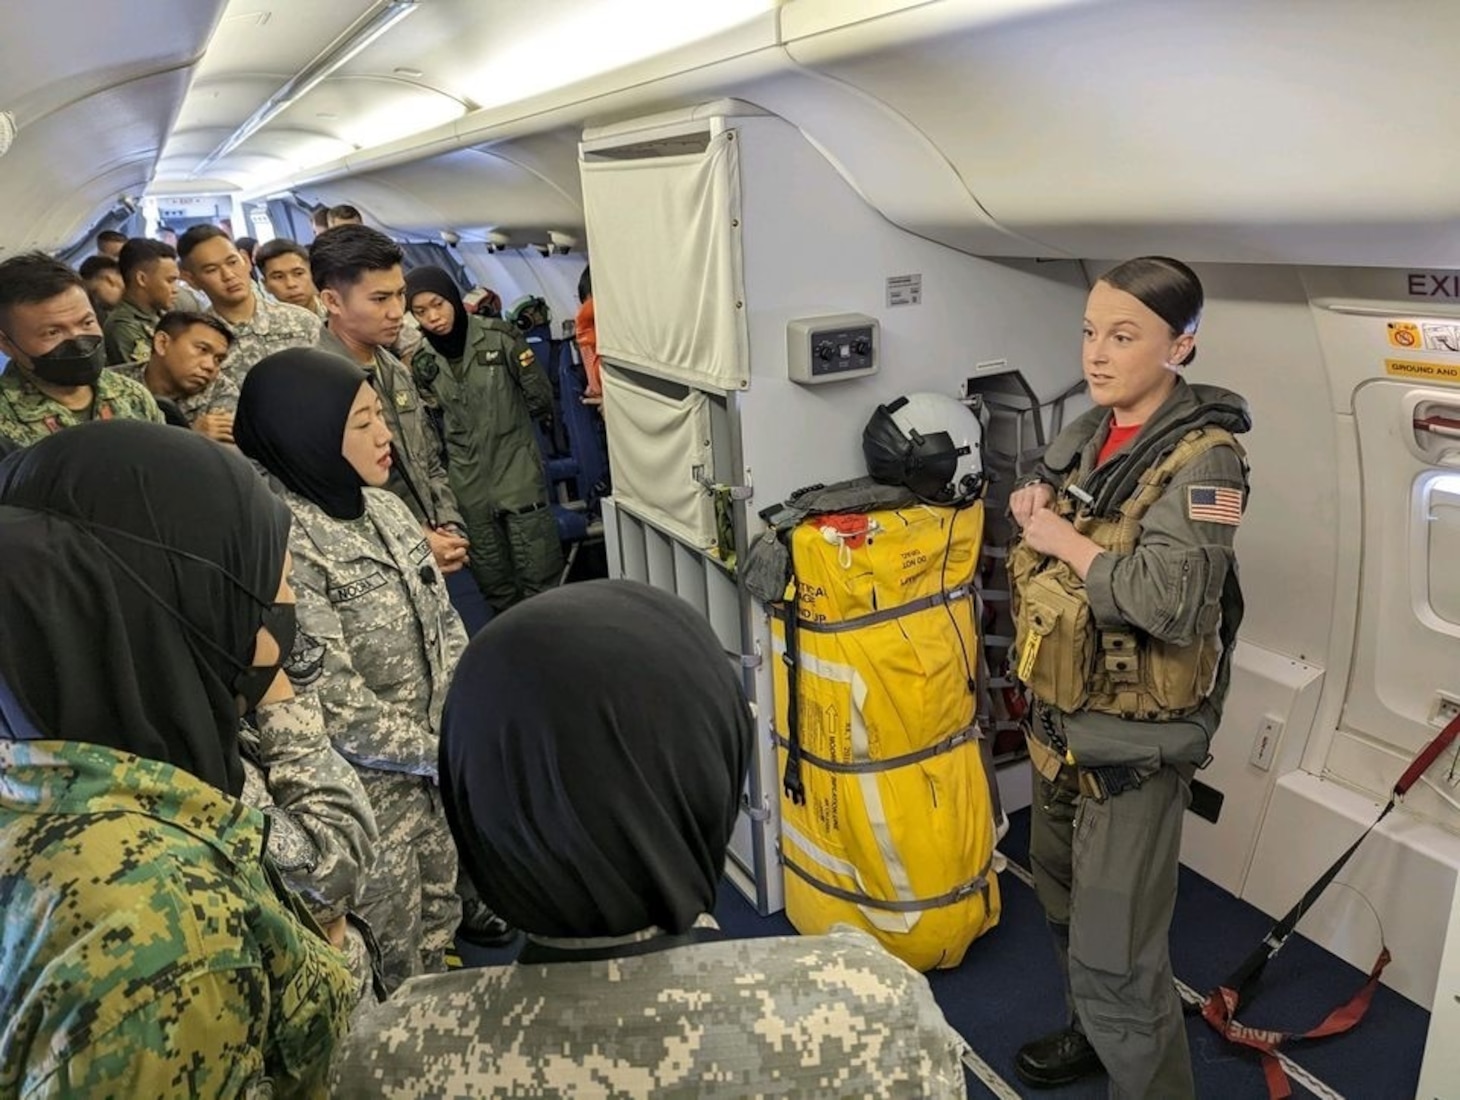 RIMBA AIR BASE, Brunei (Oct. 25, 2022) –  Naval Aircrewman (Operator) 1st Class Chelsea Mitchell, assigned to the “Red Lancers” of Patrol Squadron (VP) 10, conducts training for members of the Royal Brunei Armed Forces during Cooperation Afloat Readiness and Training Brunei 2022. VP-10 is currently operating from Kadena Air Base in Okinawa, Japan. The squadron conducts maritime patrol and reconnaissance, as well as theater outreach operations, as part of a rotational deployment to the U.S. 7th Fleet area of operations. (U.S. Navy photo by Aviation Electrician’s Mate 1st Class Brian Woodford) (U.S. Navy photo by Aviation Electrician’s Mate 1st Class Brian Woodford)